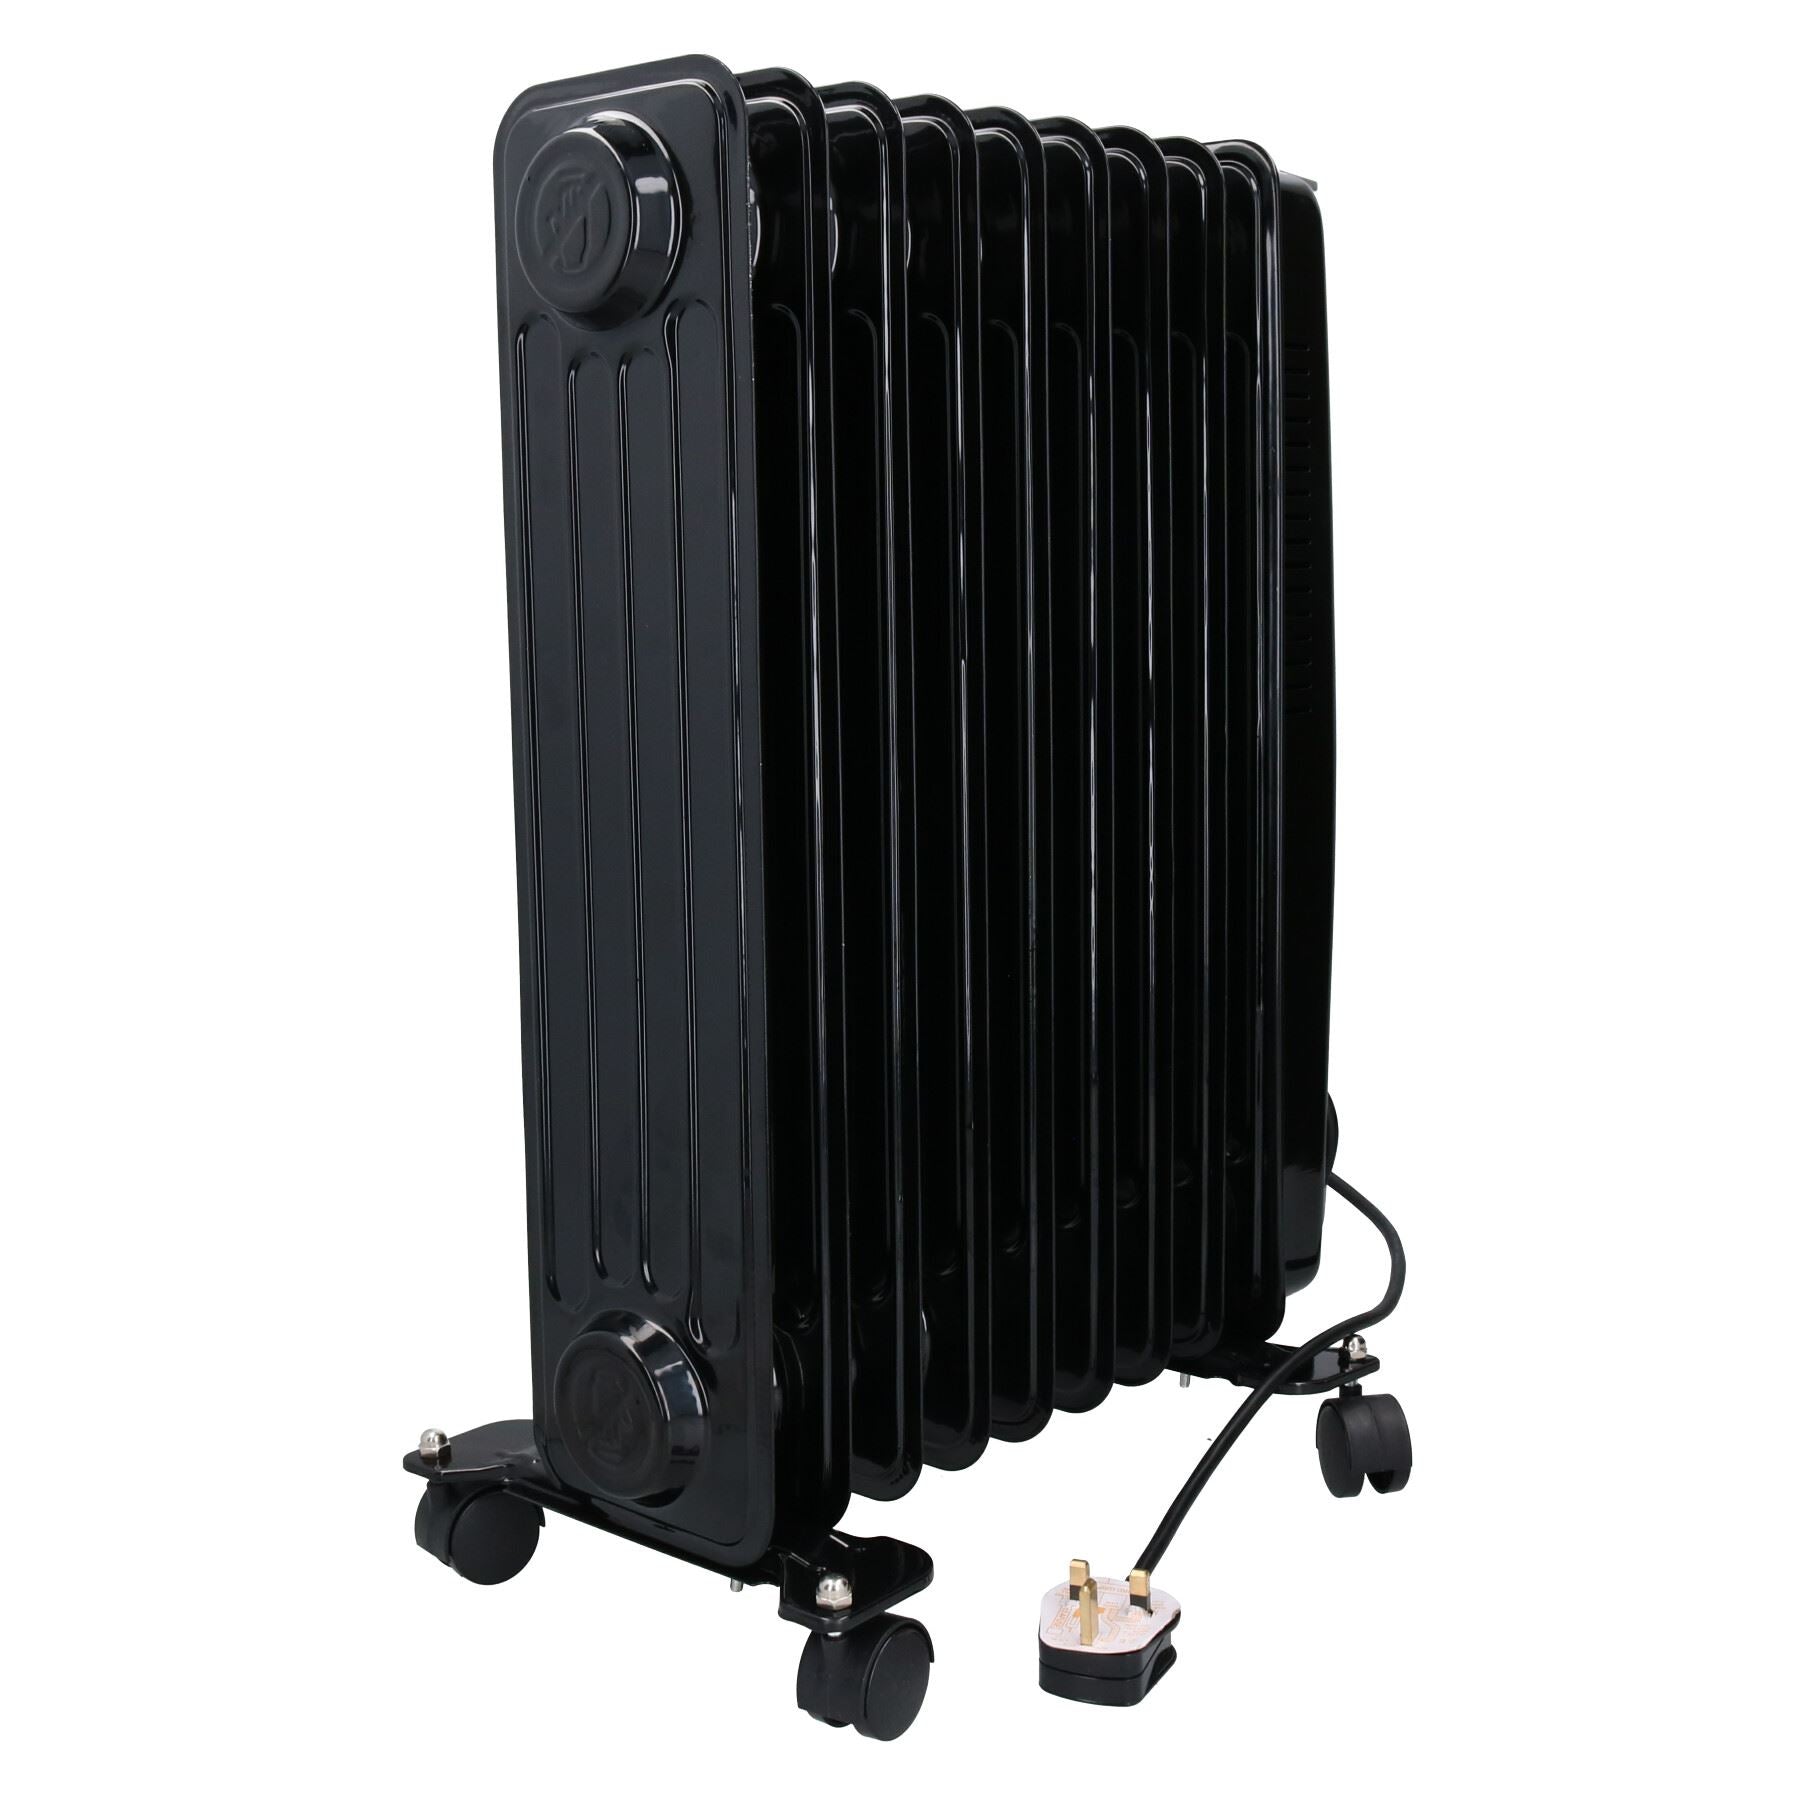 2KW 9 Fin Slim line Oil Filled Radiator Heater With Adjustable Thermostat Black